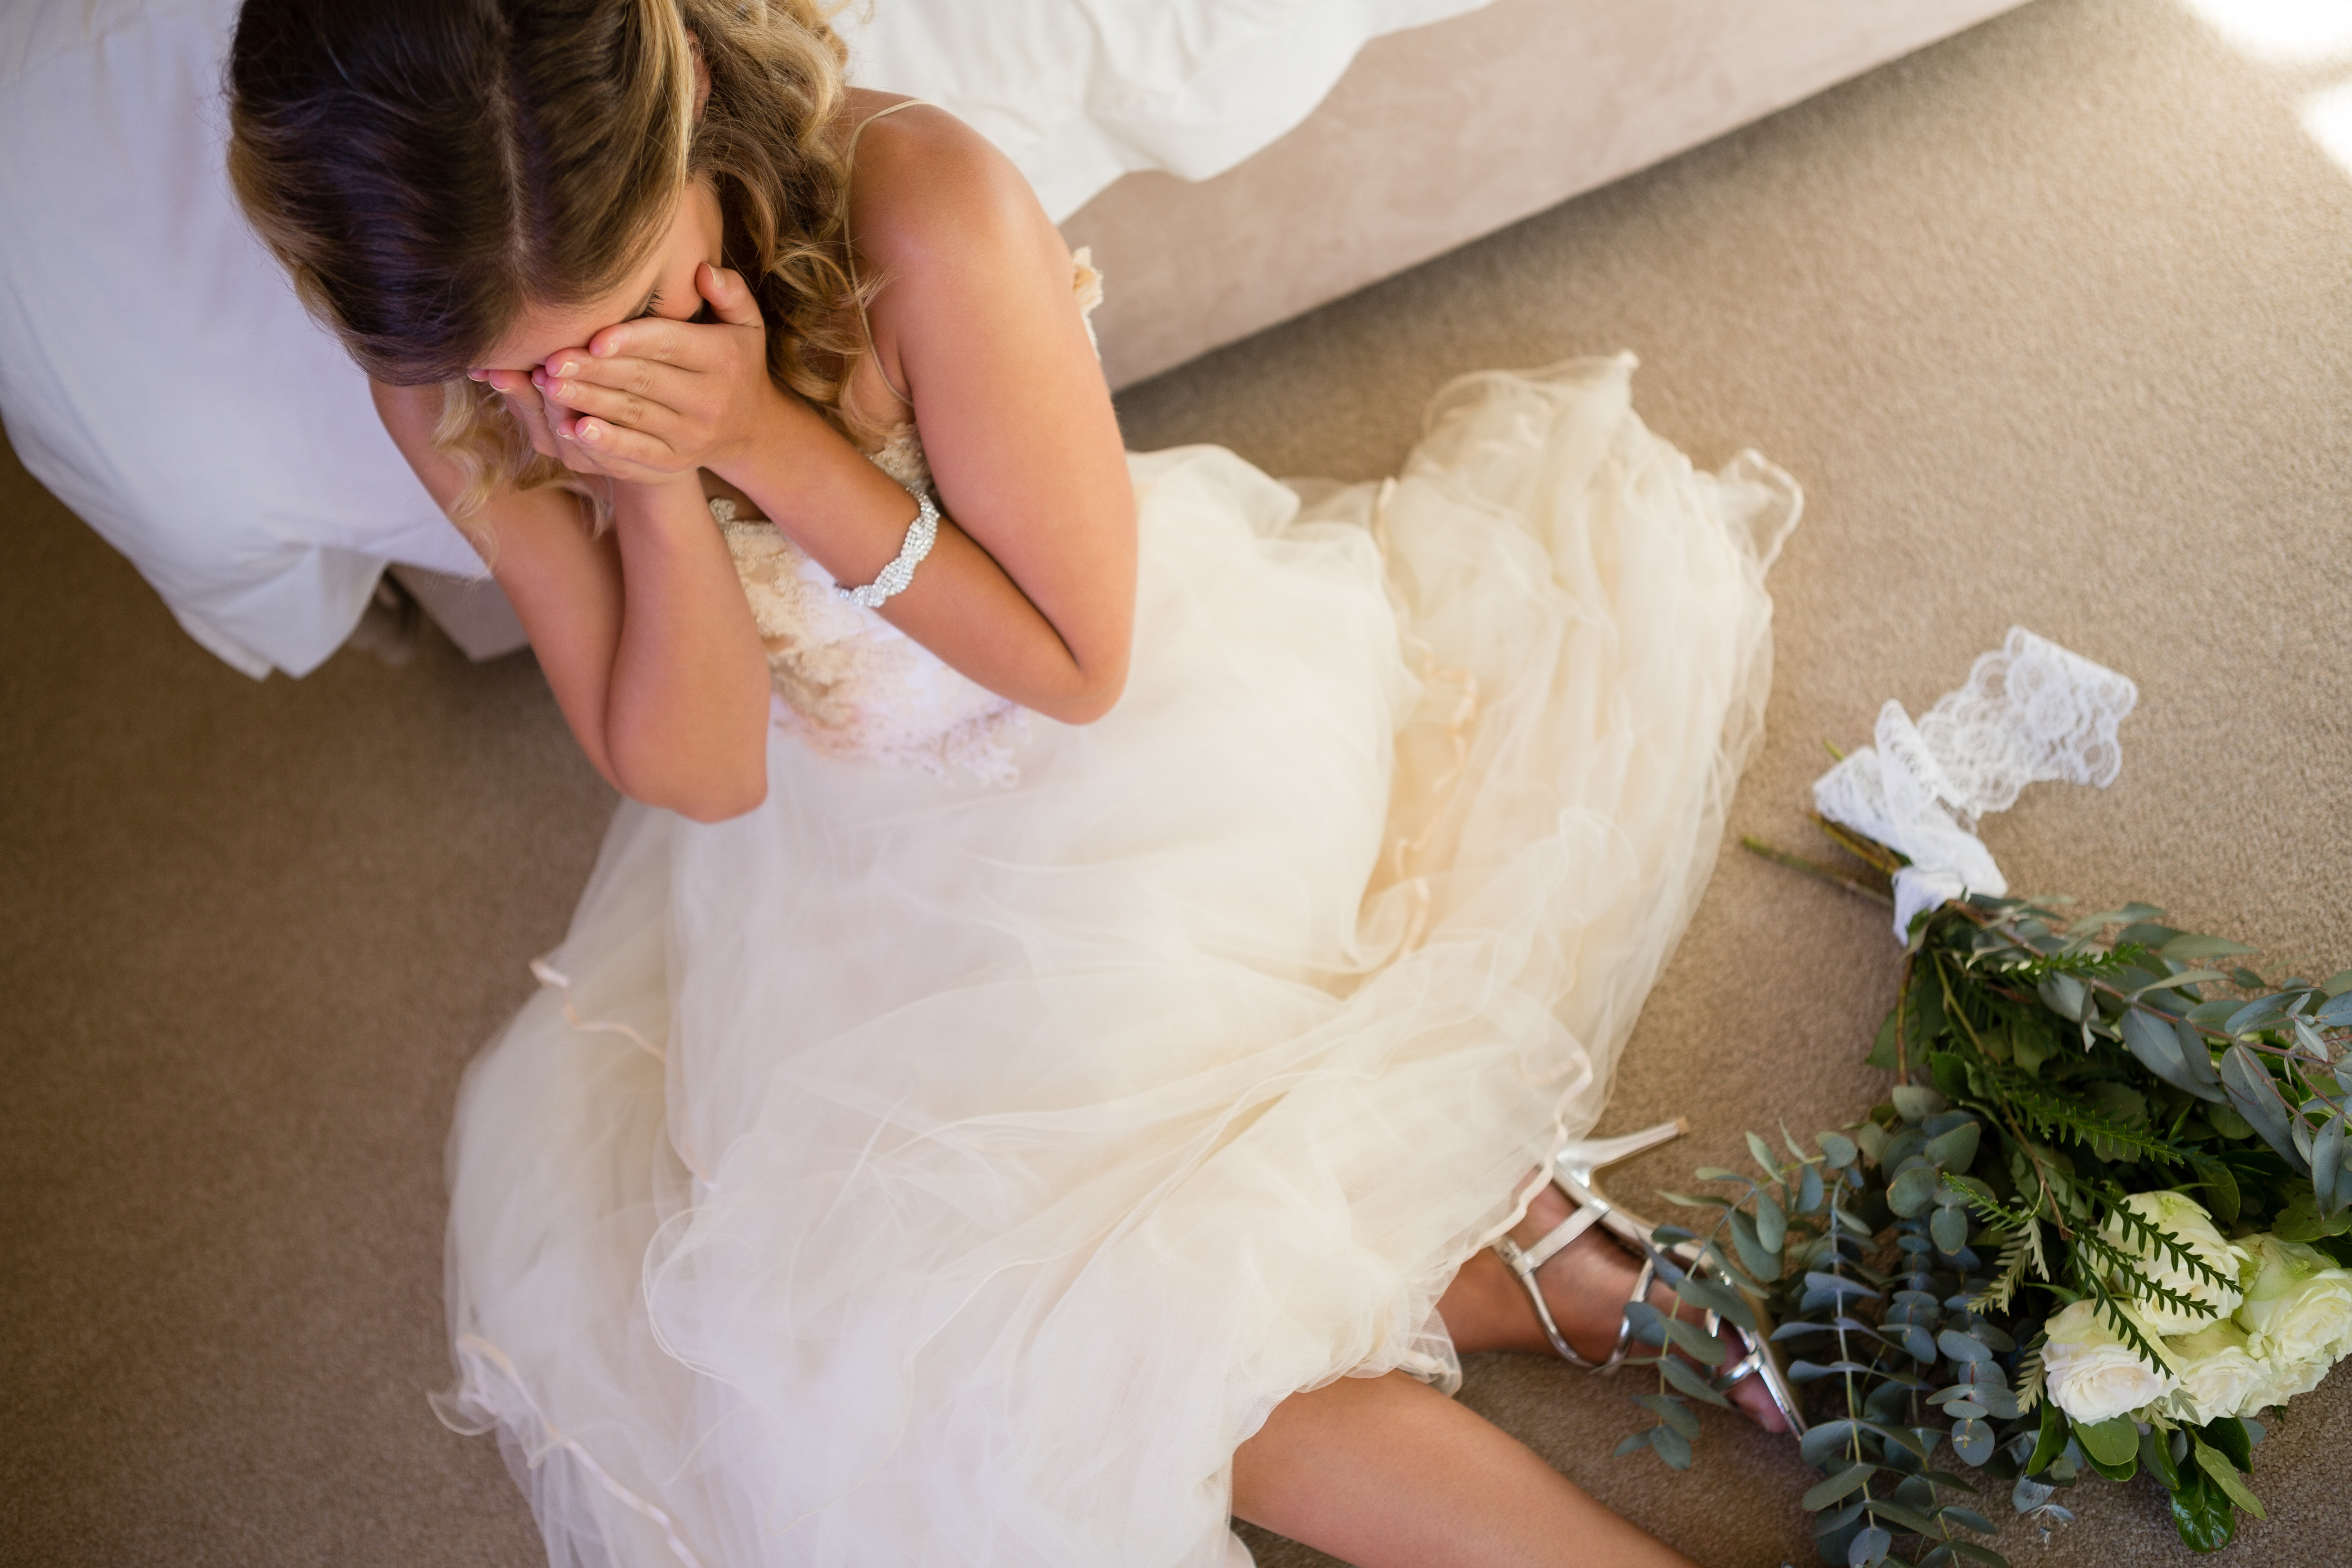 A bride crying on the floor as she leans on a bed | Source: Shutterstock